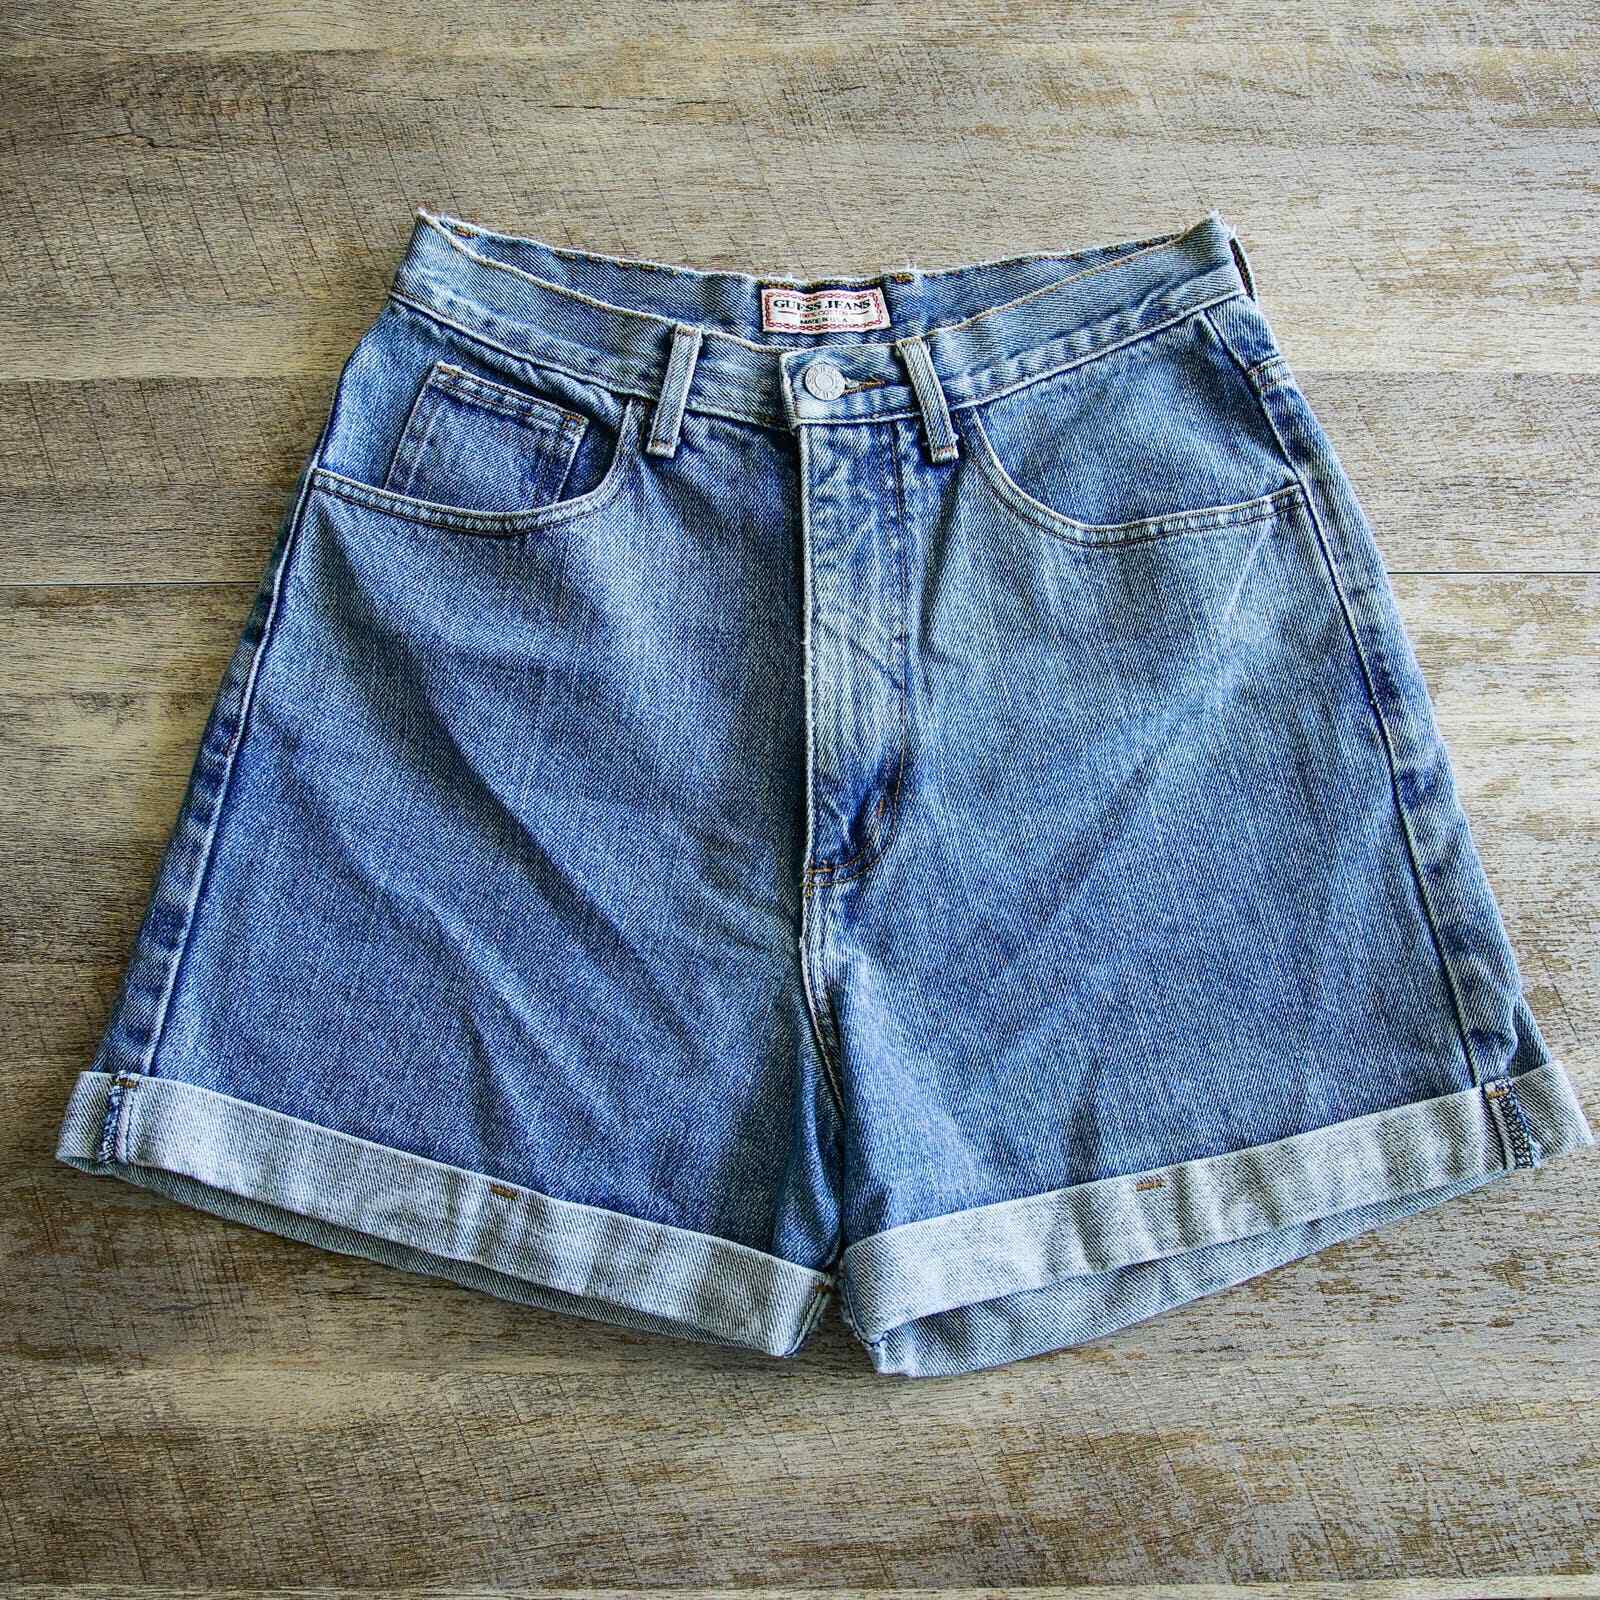 Vintage 80's Guess High rise cuffed Shorts size 30 - image 1